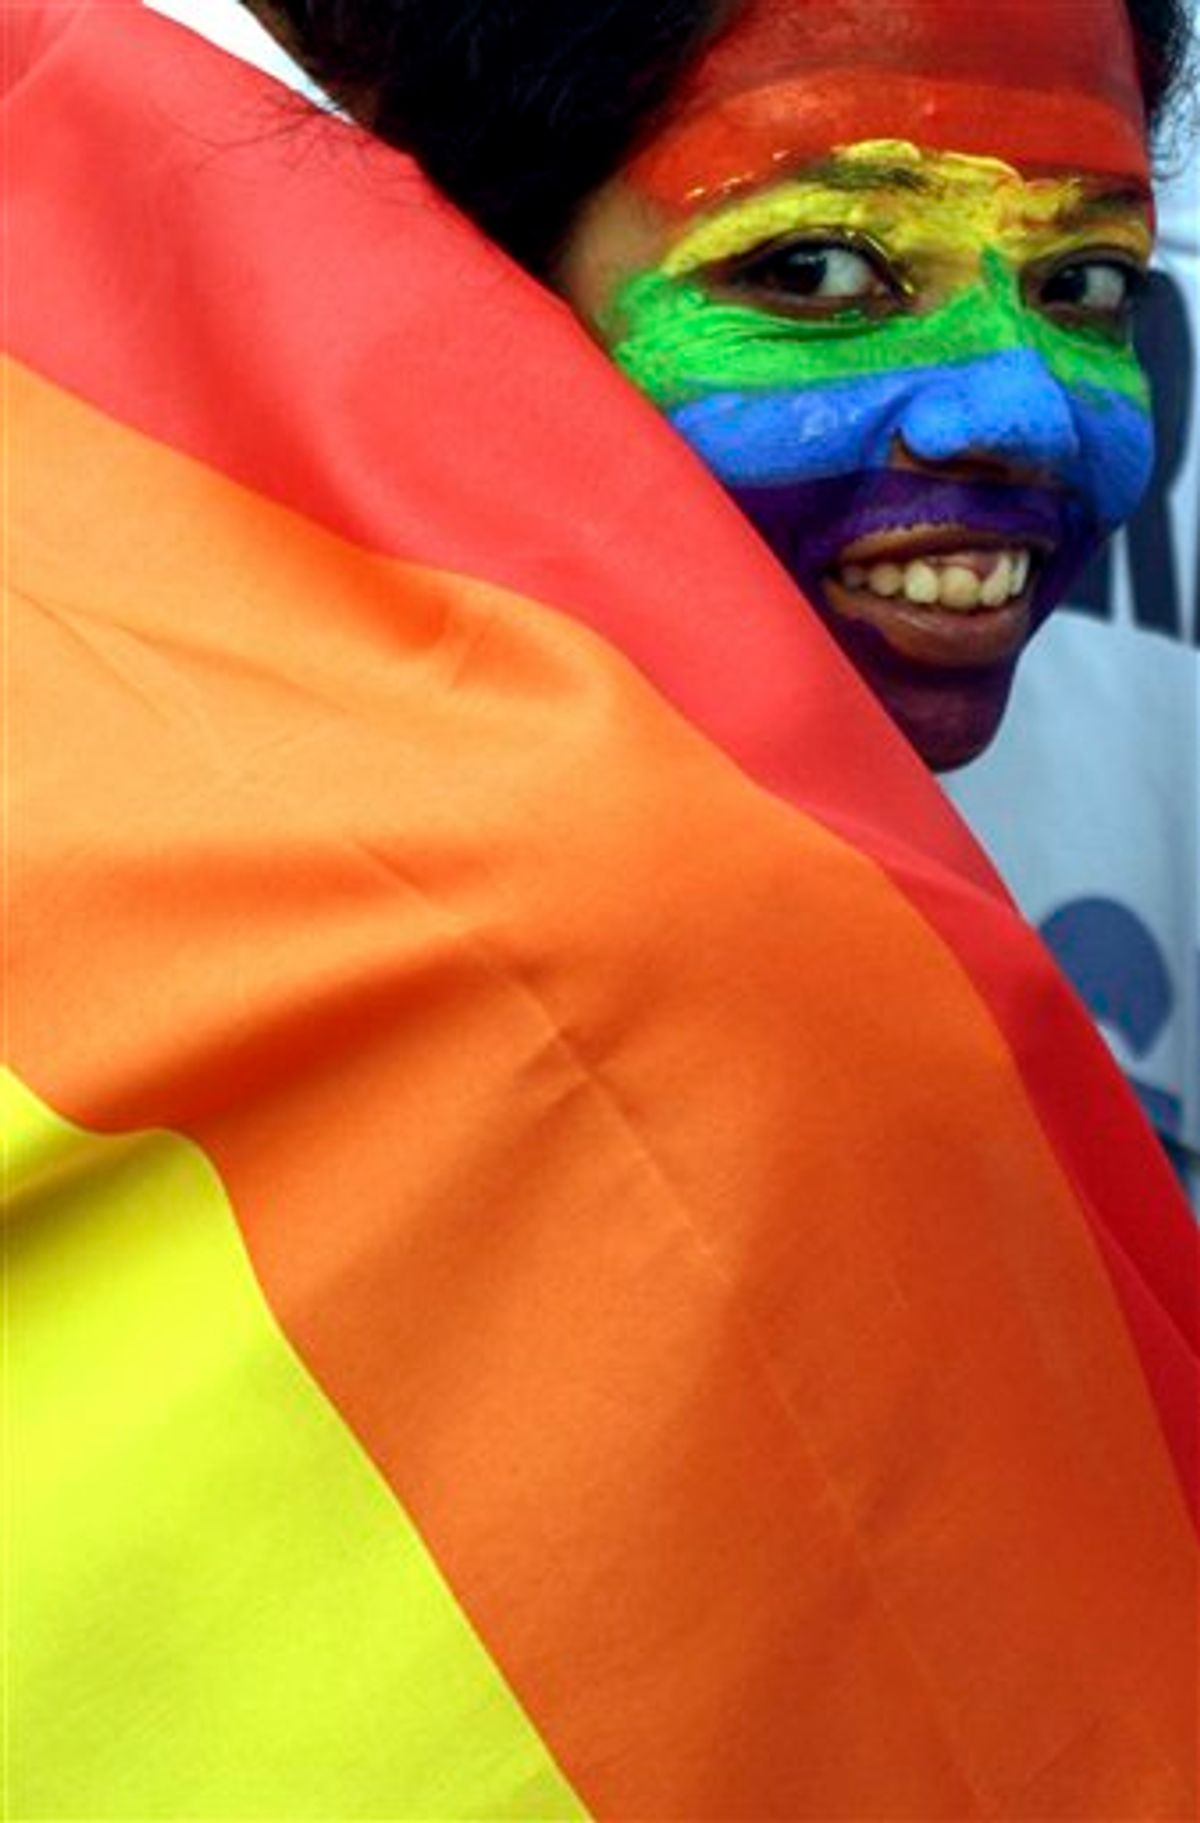 FILE - In this July 2, 2009 file photo, a gay rights activist in Calcutta, India, participates in a rally celebrating the groundbreaking ruling by the Delhi High Court decriminalizing homosexuality. The United Nations issued its first condemnation of discrimination against gays, lesbians and transgender people on Friday, June 17, 2011, in a cautiously worded declaration hailed by supporters as a historic moment. Members of the U.N. Human Rights Council narrowly voted in favor of the resolution put forward by South Africa, against strong opposition from African and Islamic countries. (AP Photo/Sucheta Das, File) (AP)